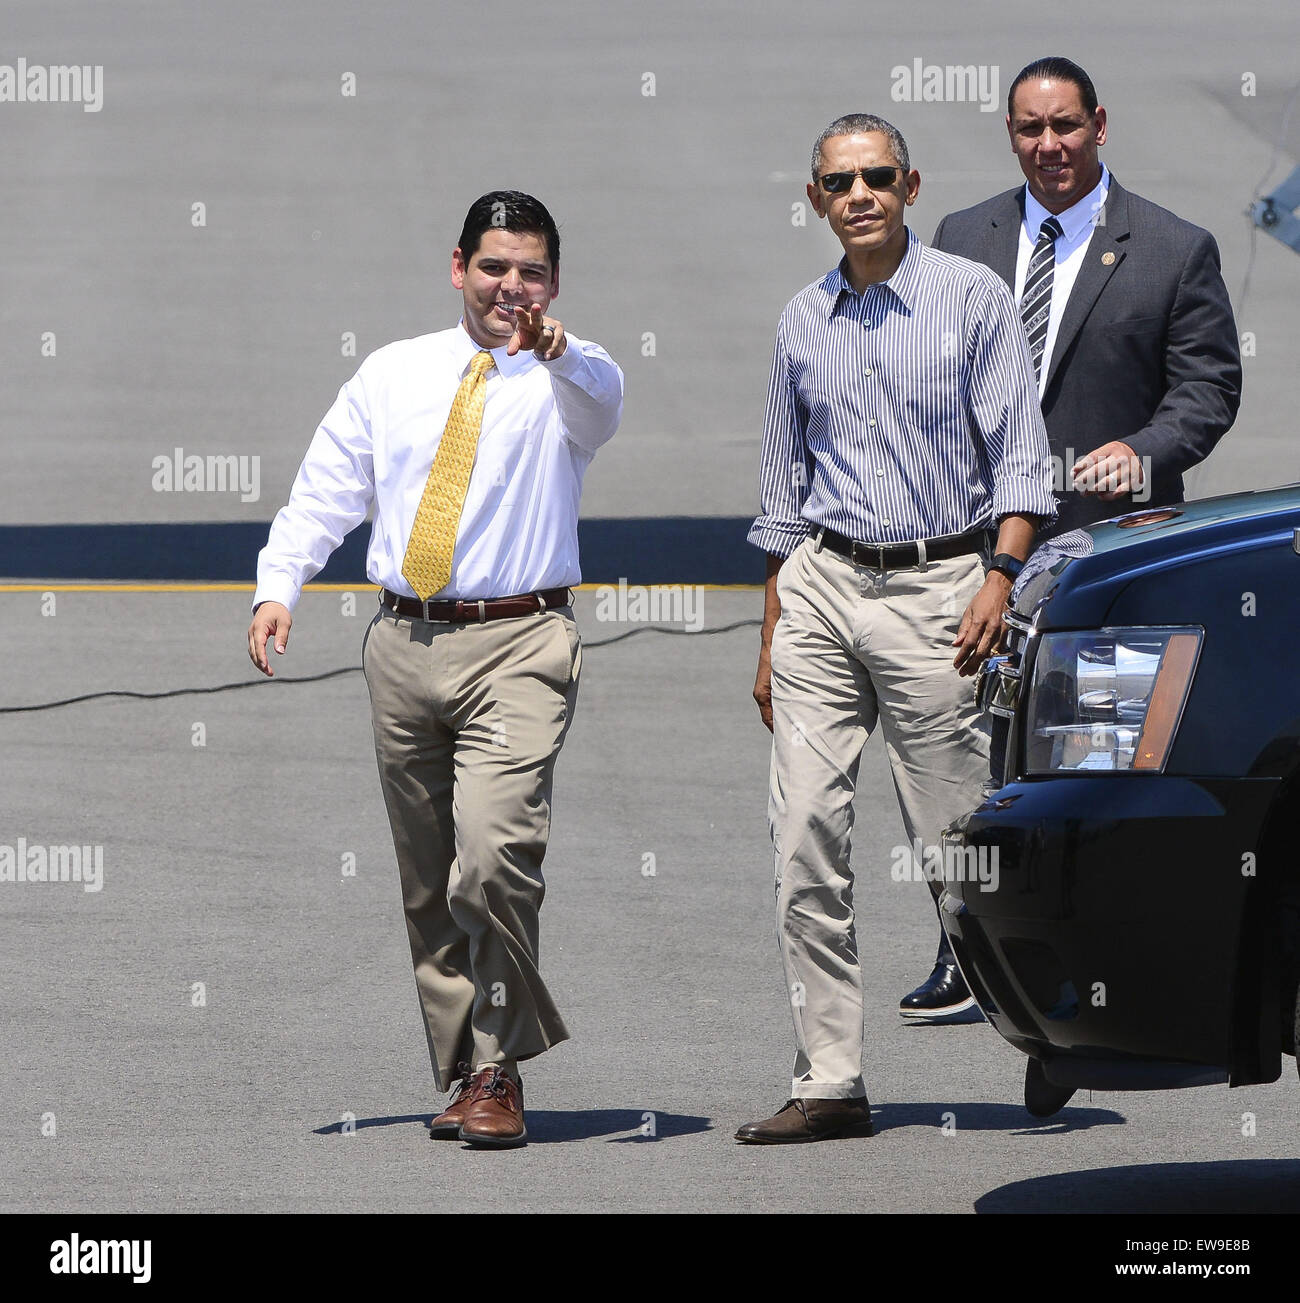 Palm Springs, California, USA. 20th June, 2015. President Barack Obama arrived at Palm Springs International Airport on Saturday morning at the end of a west coast trip that included stops in Los Angeles and San Francisco on a DNC and DCCC fundraising trip. Obama exited Air Force One dressed causally in a long sleeved shirt with rolled up sleeves and khaki pants in addition to a pair of sunglasses. Credit:  ZUMA Press, Inc./Alamy Live News Stock Photo